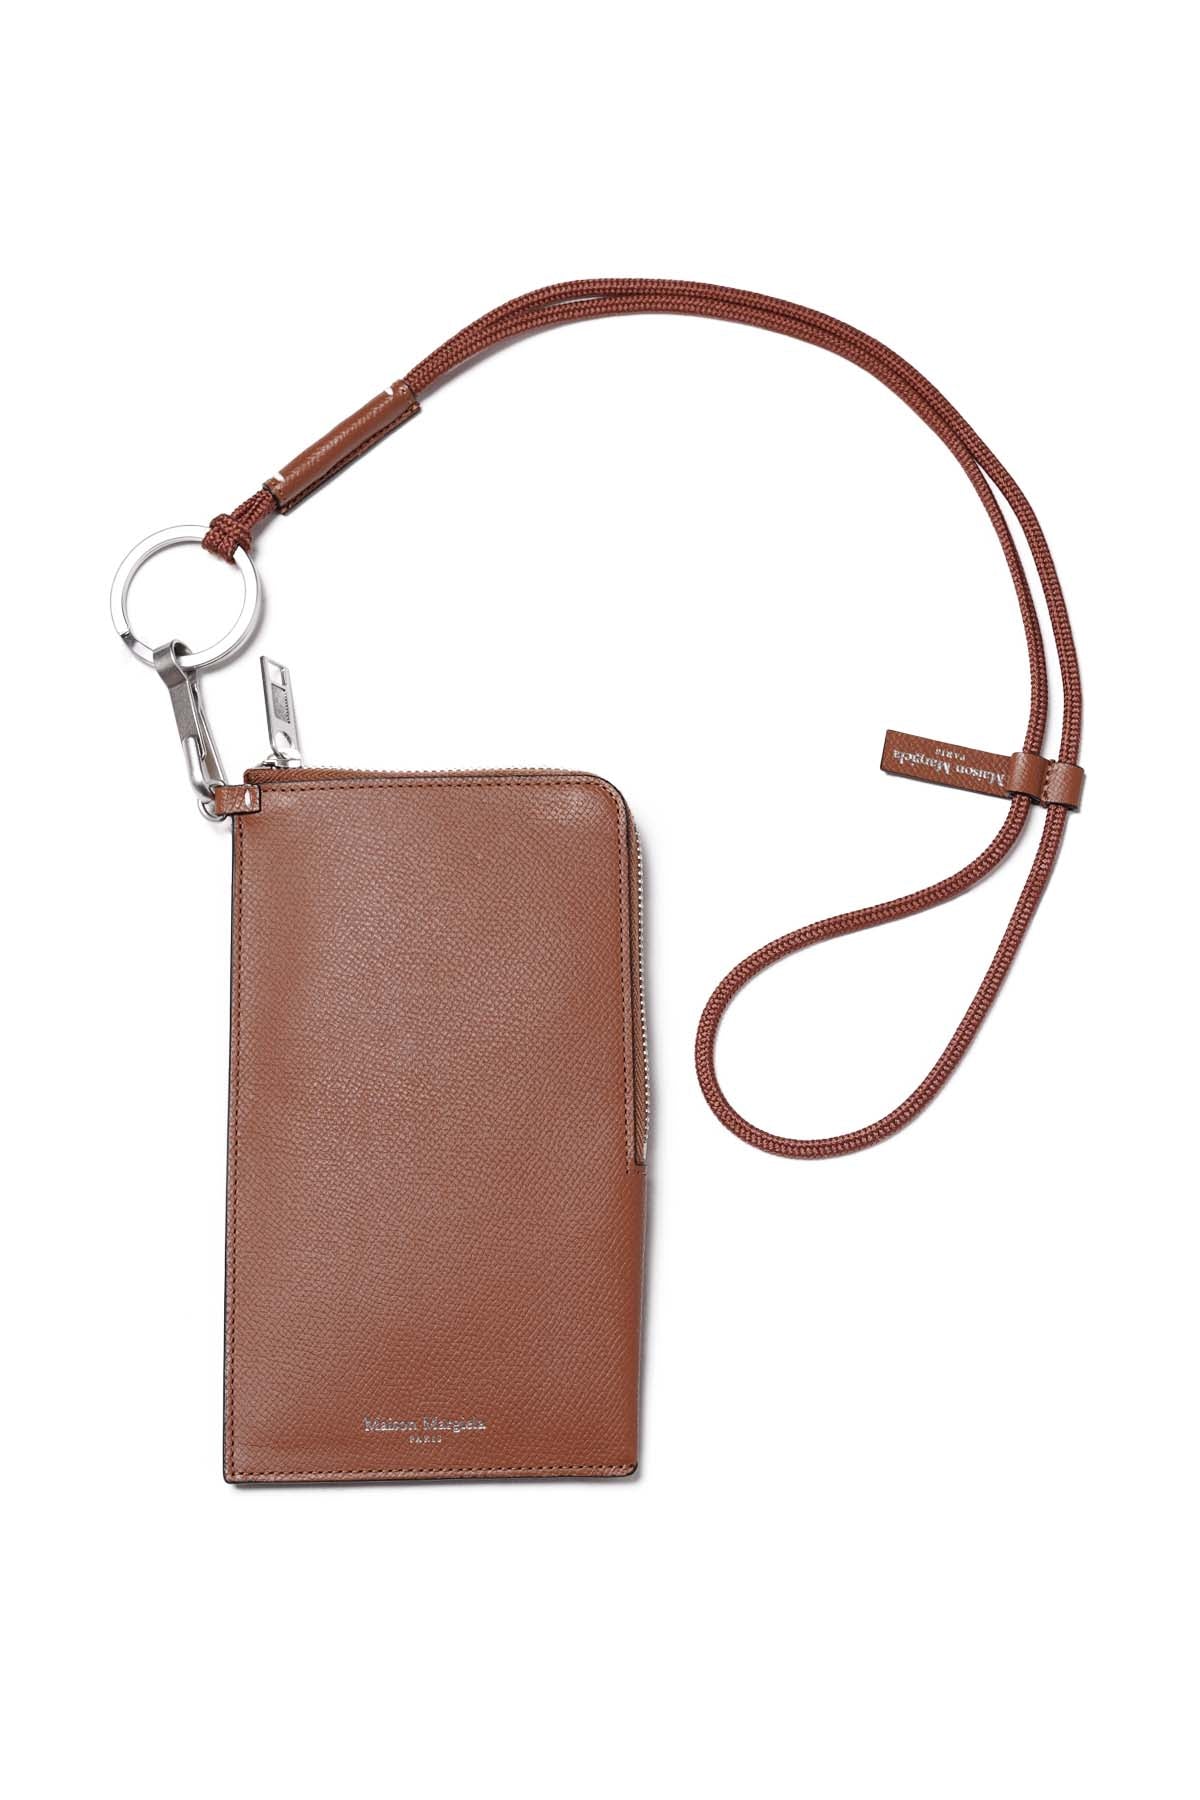 iPhone Case Brown 【30%OFF】